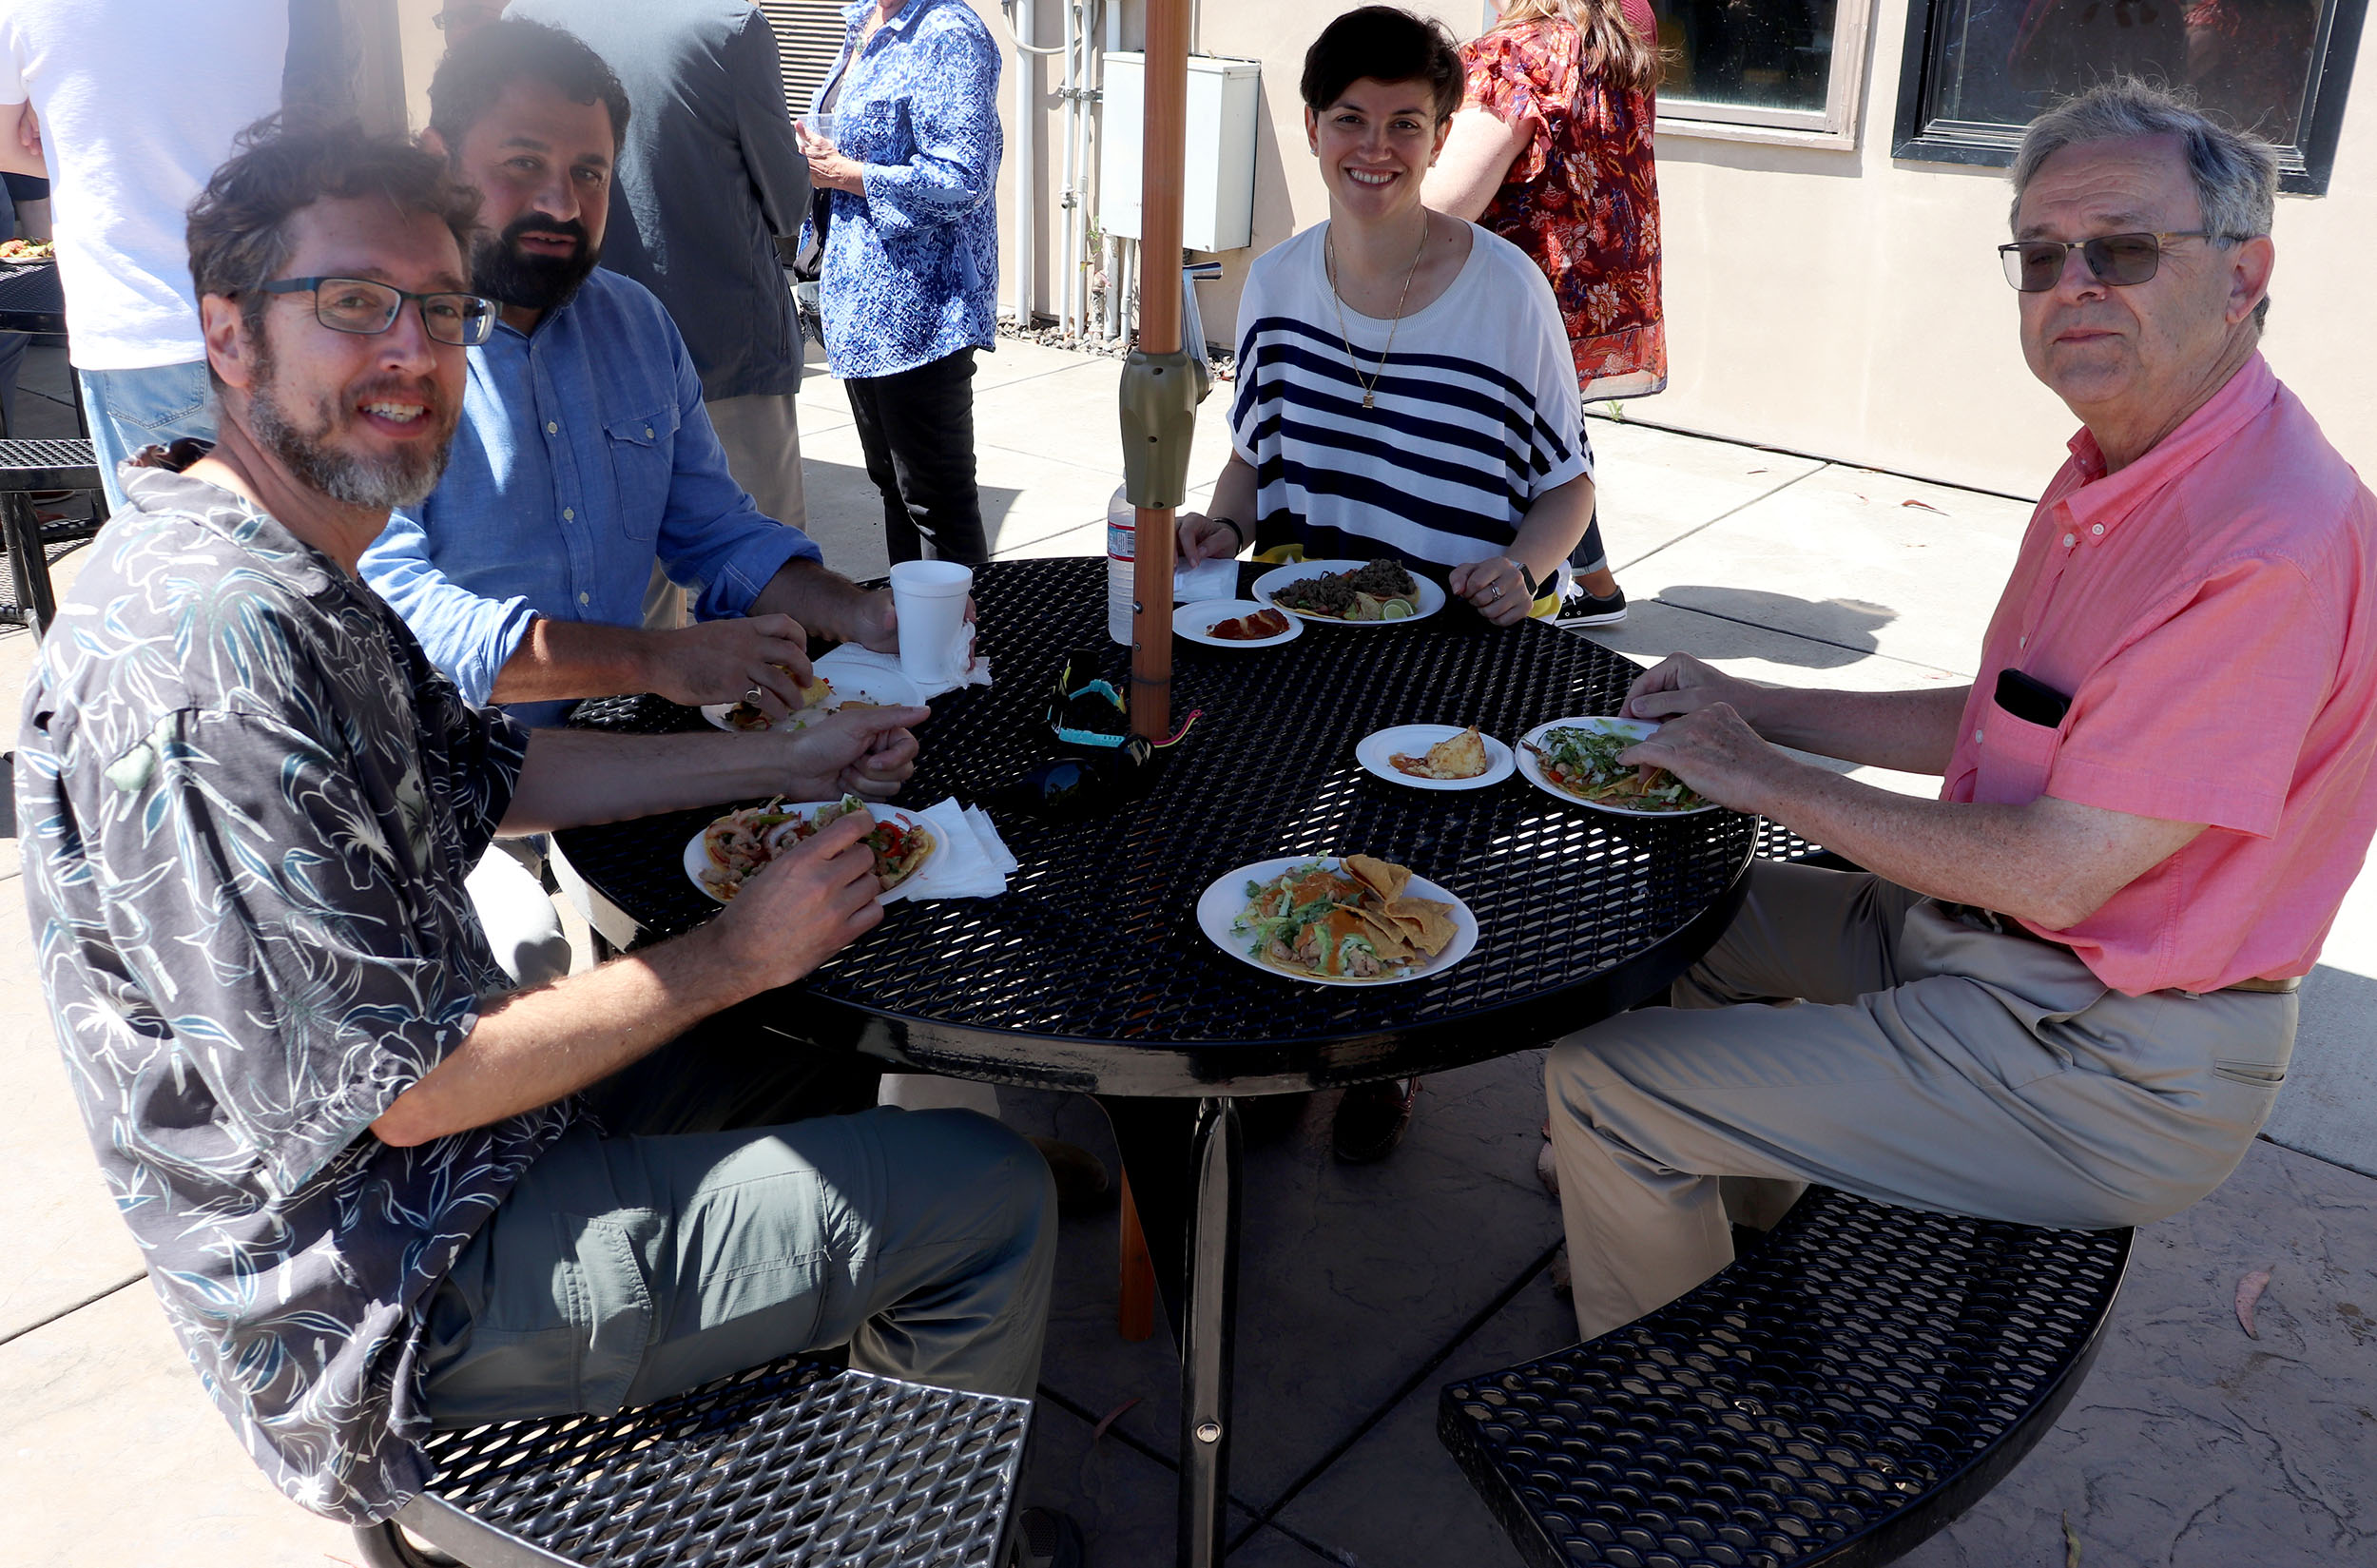 ITS BErkeley and Center staff came together to celebrate award winners with an end of summer lunch